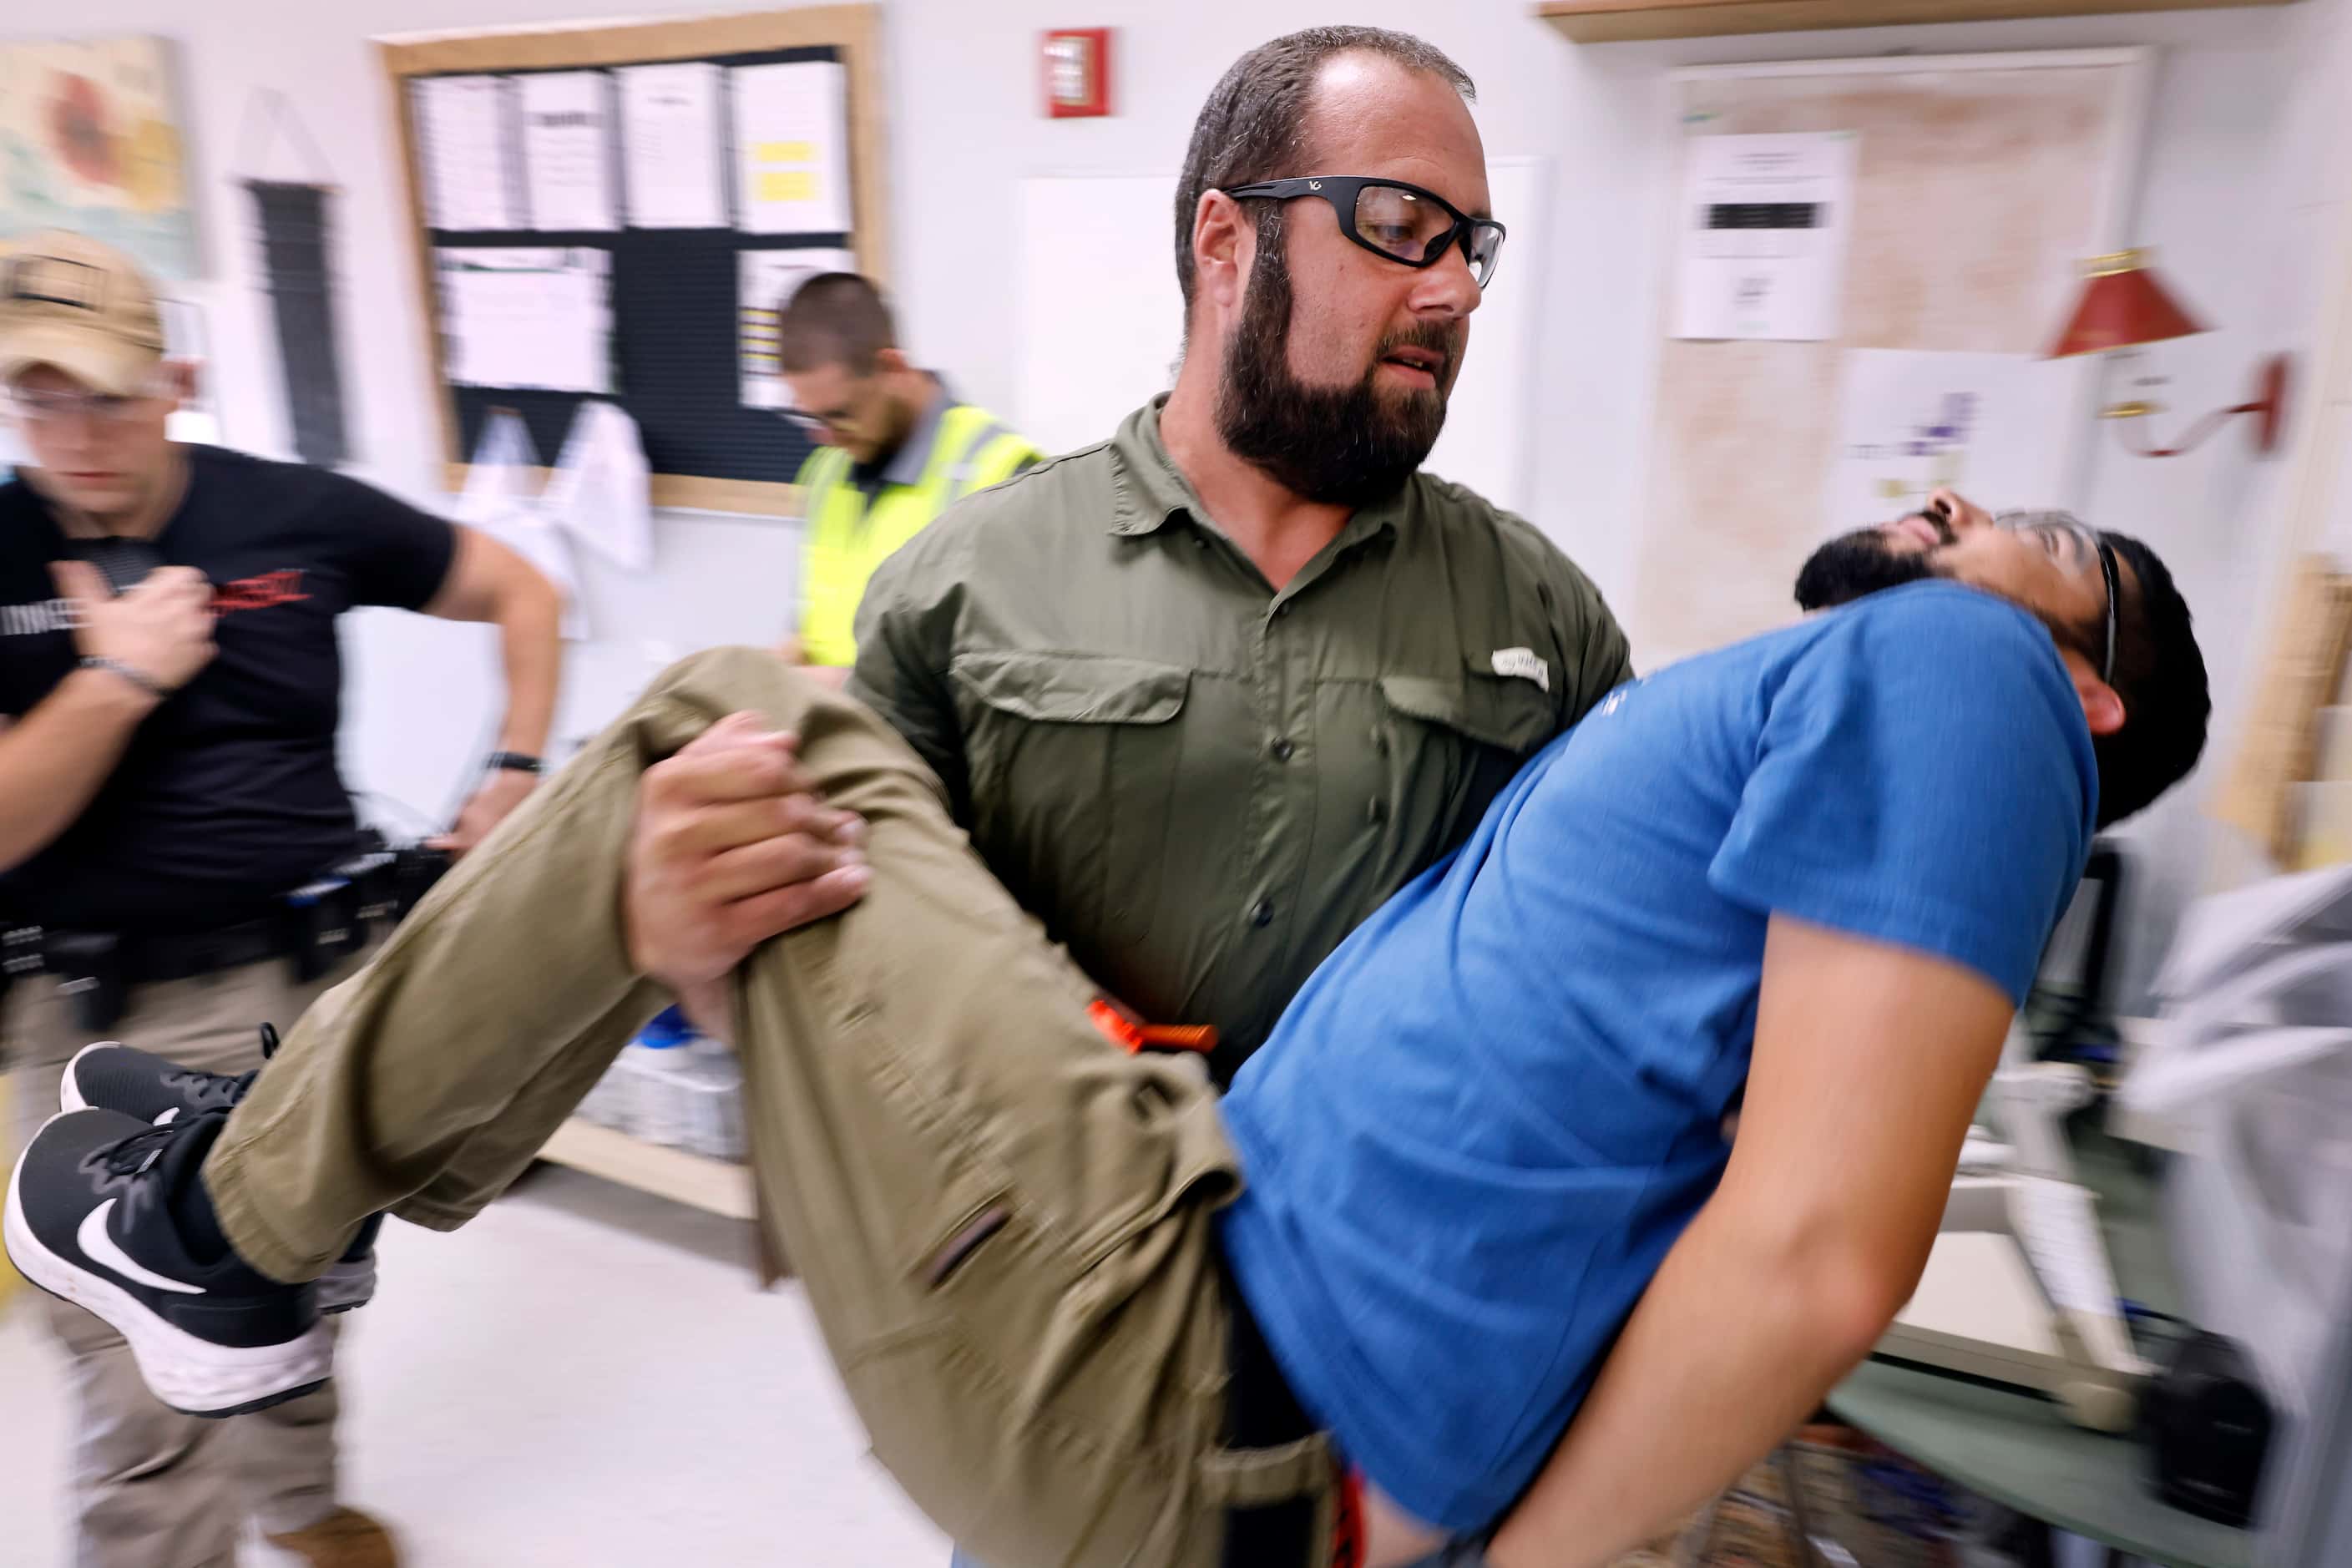 Henderson County Sheriff’s Deputy Mathew Jistel carries a wounded victim, portrayed by...